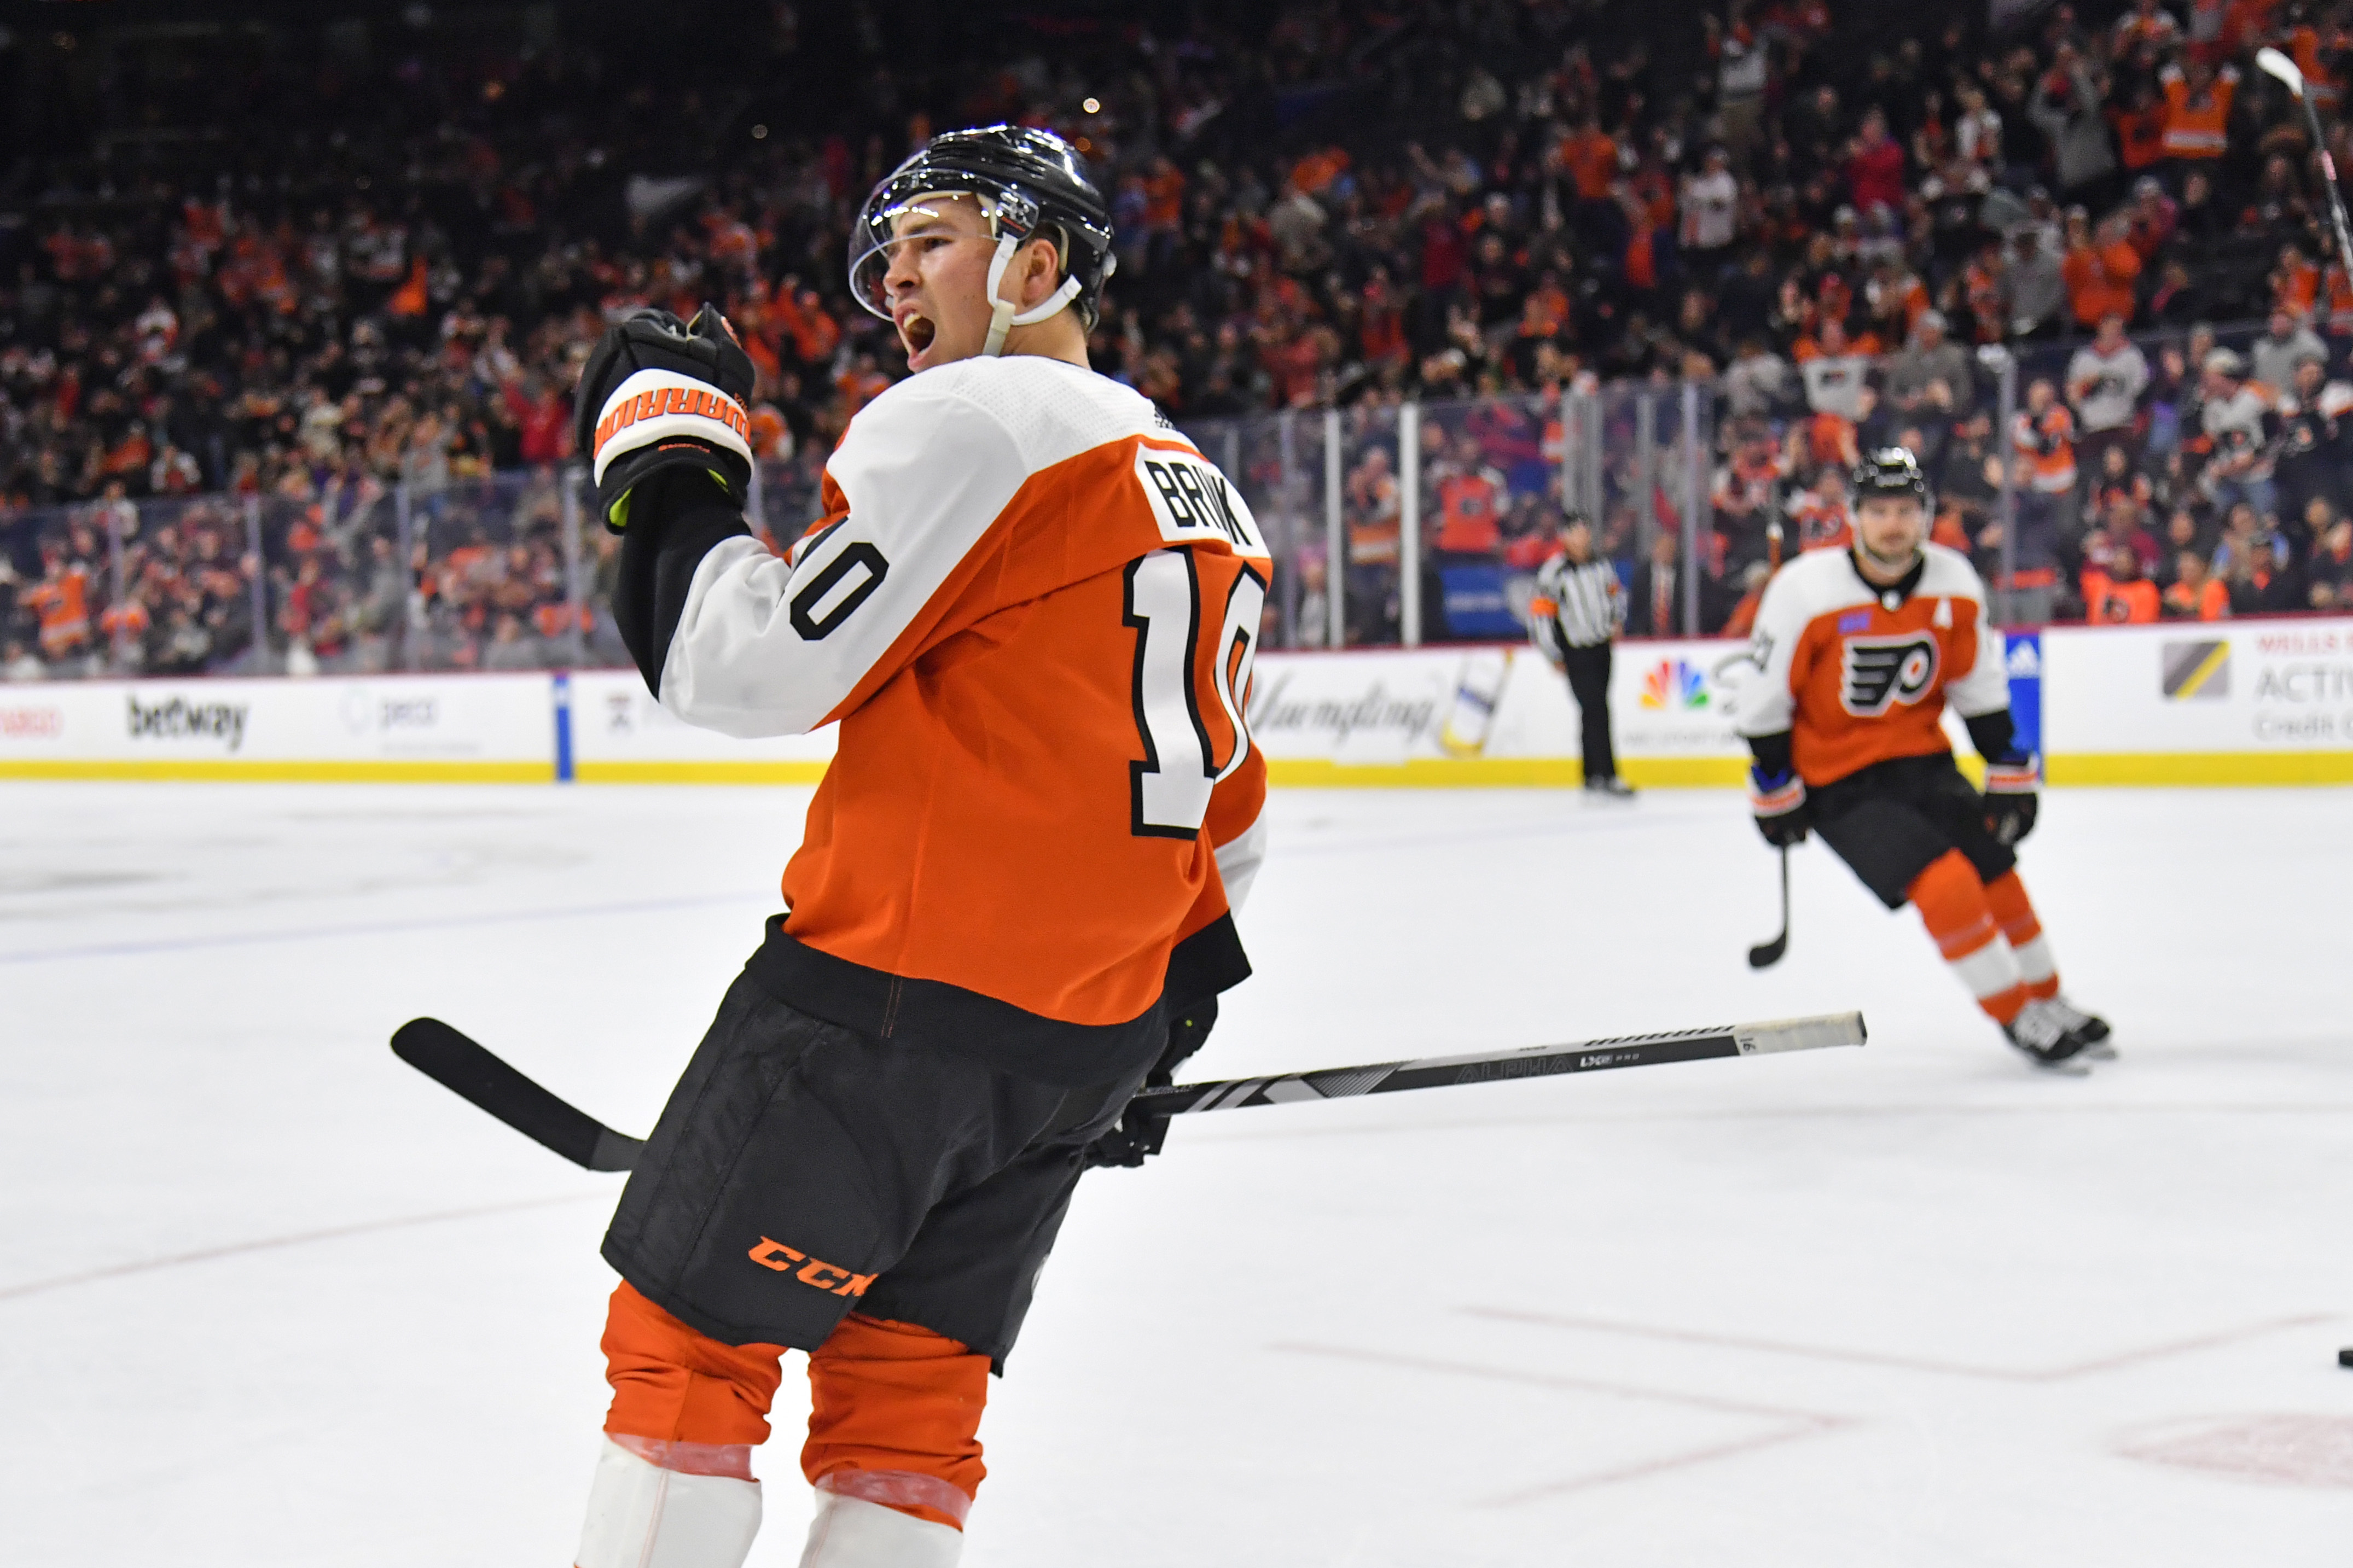 Cam Atkinson helps Flyers breeze by Oilers